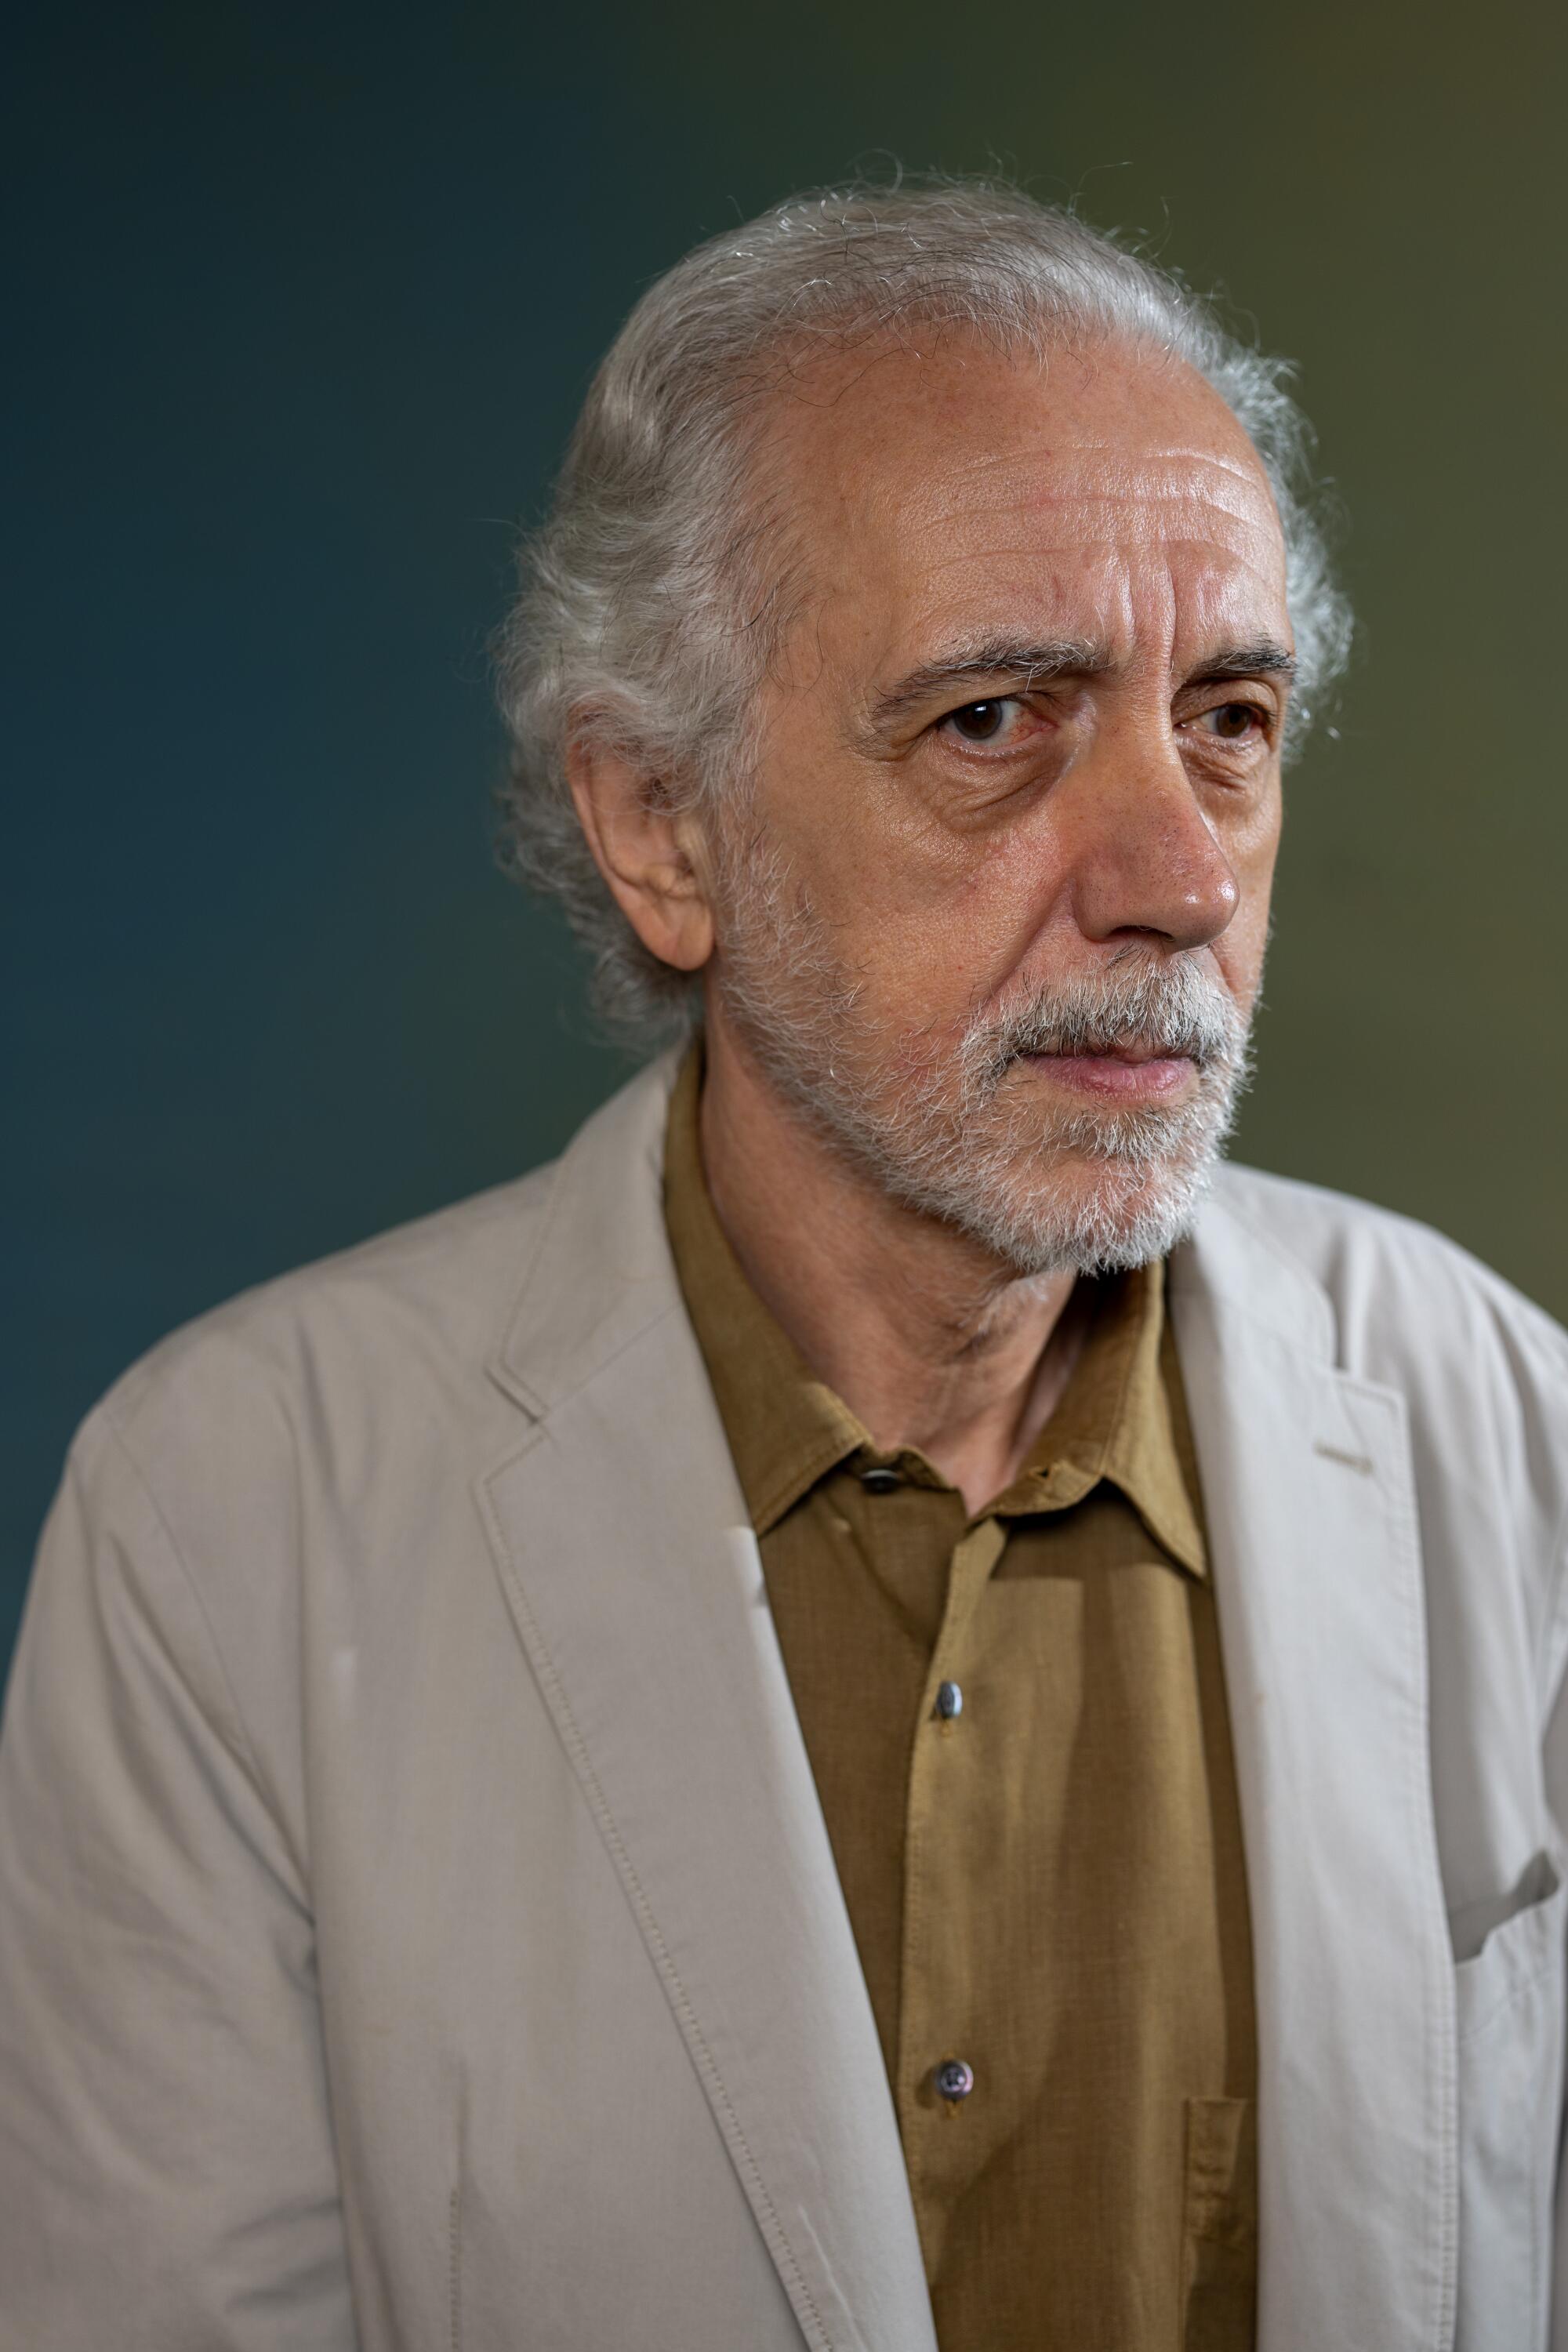 Fernando Trueba looks to the side while wearing a brown shirt and white jacket.